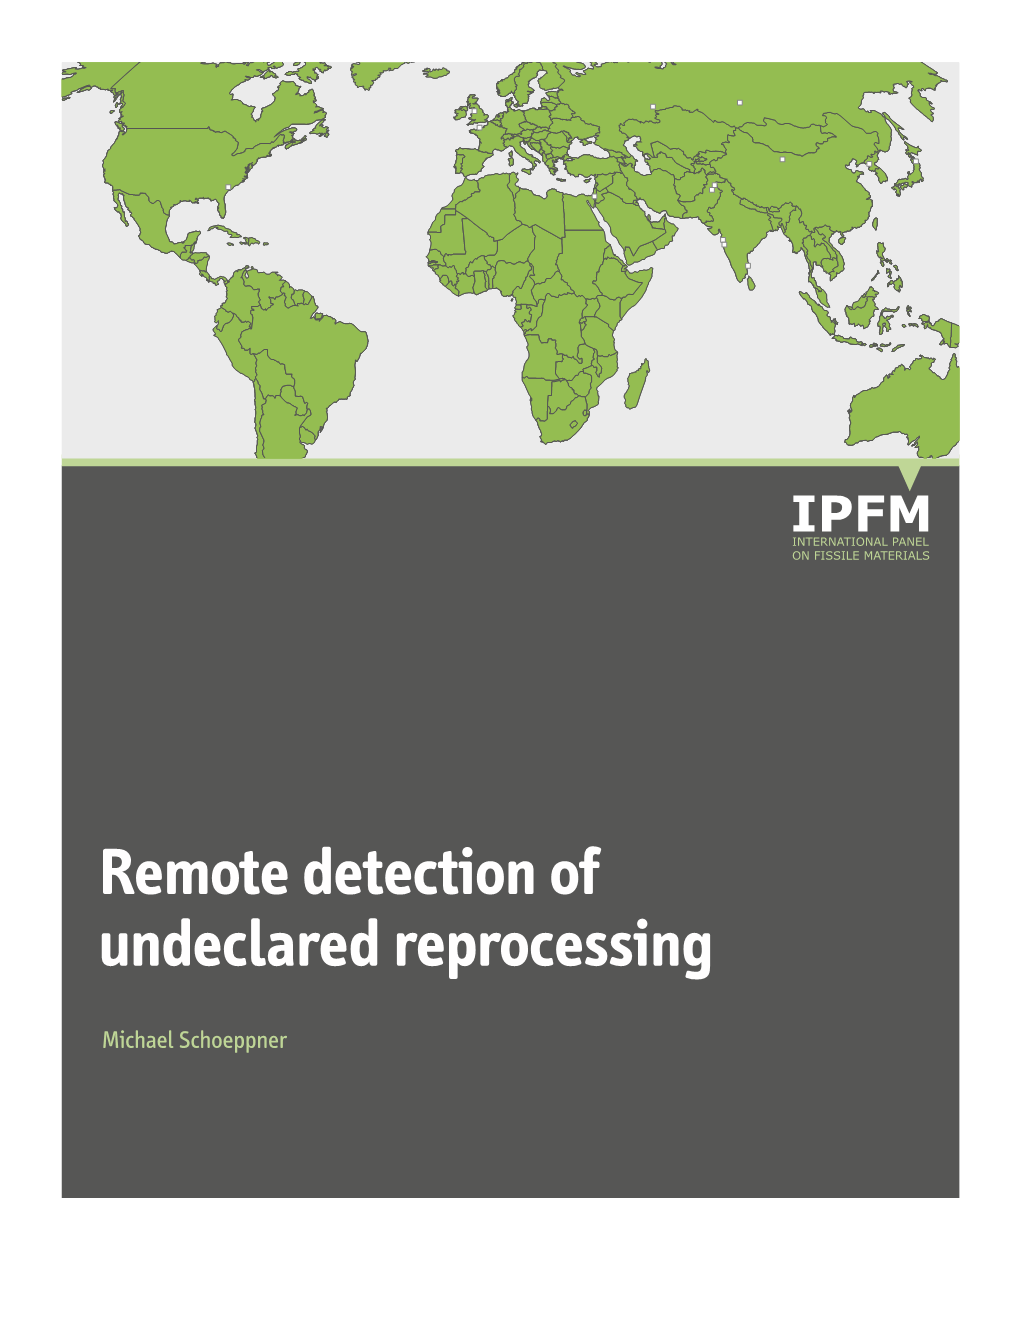 Remote Detection of Undeclared Reprocessing